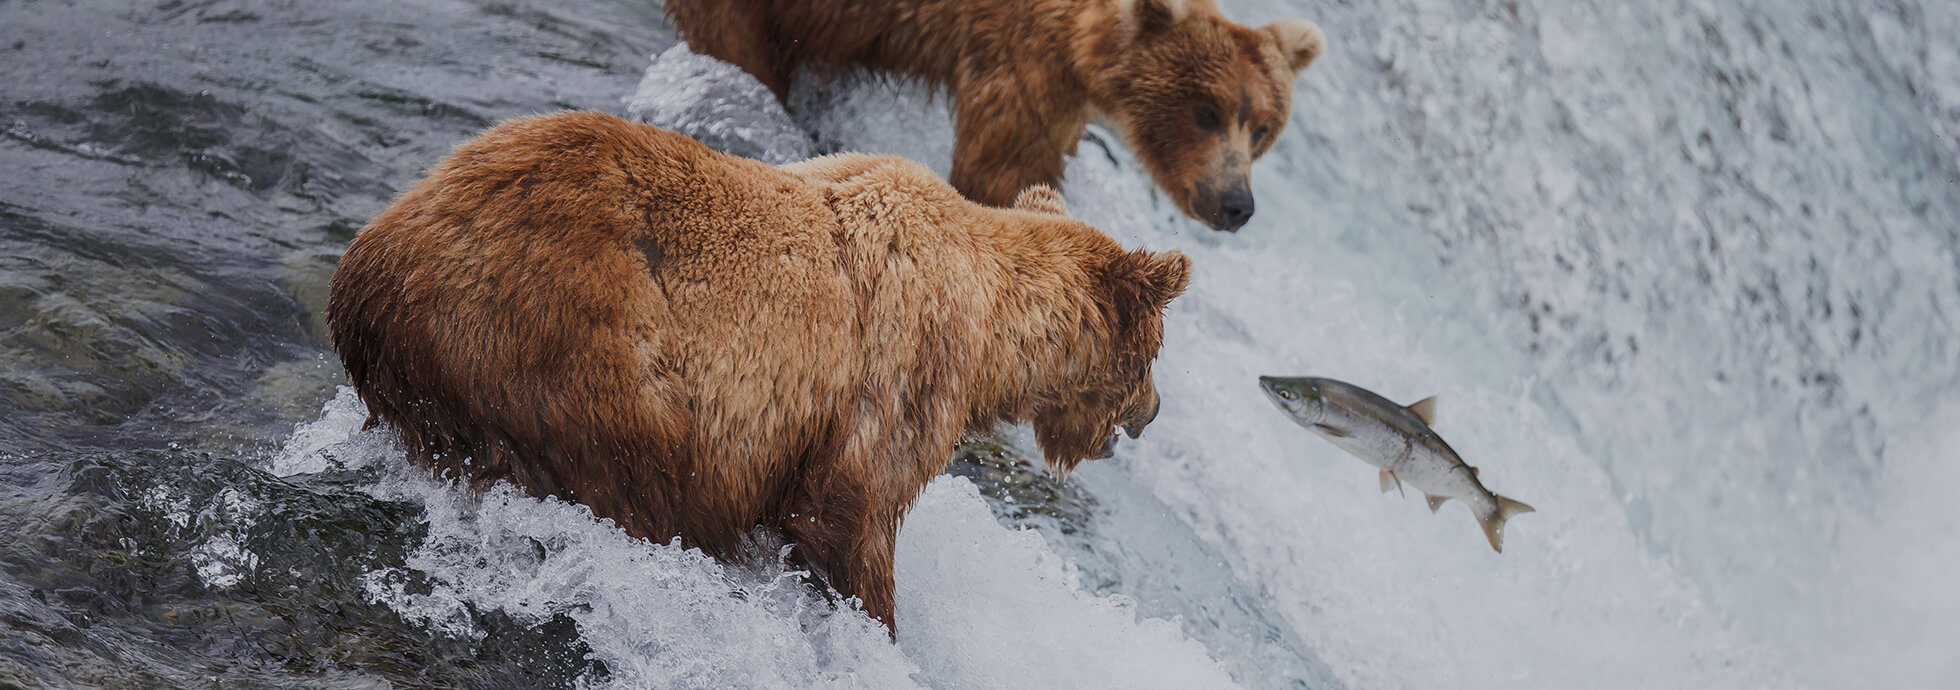 Bears dining on salmon in a Yellowstone river